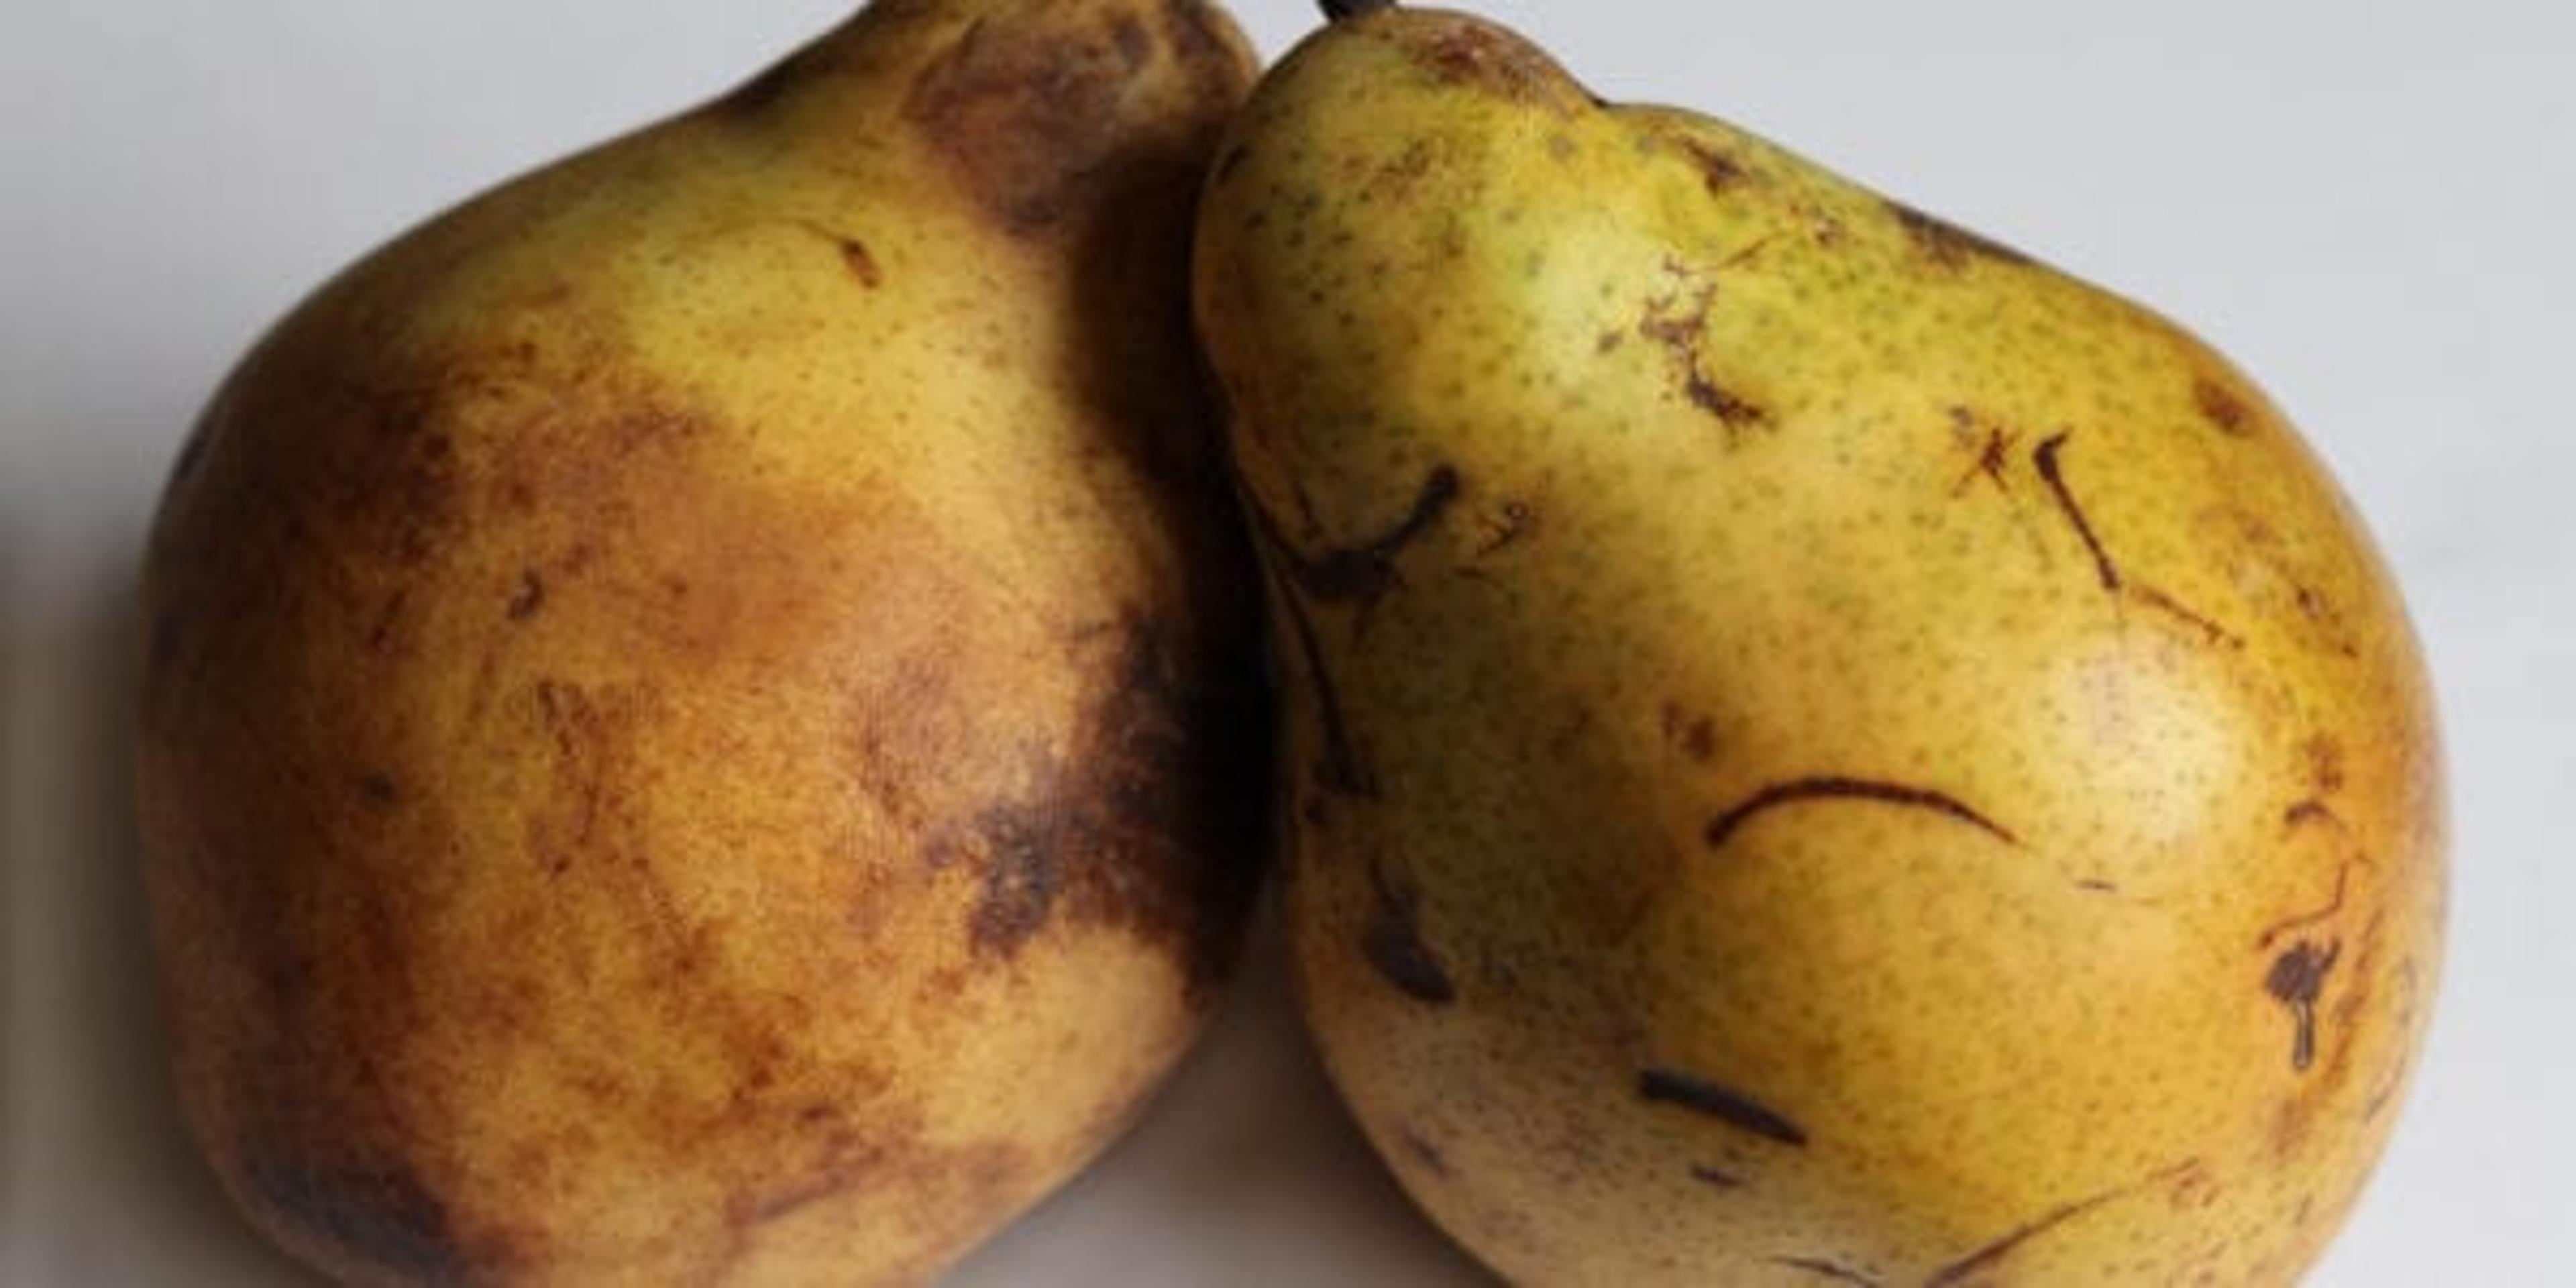 Give ugly fruits a chance